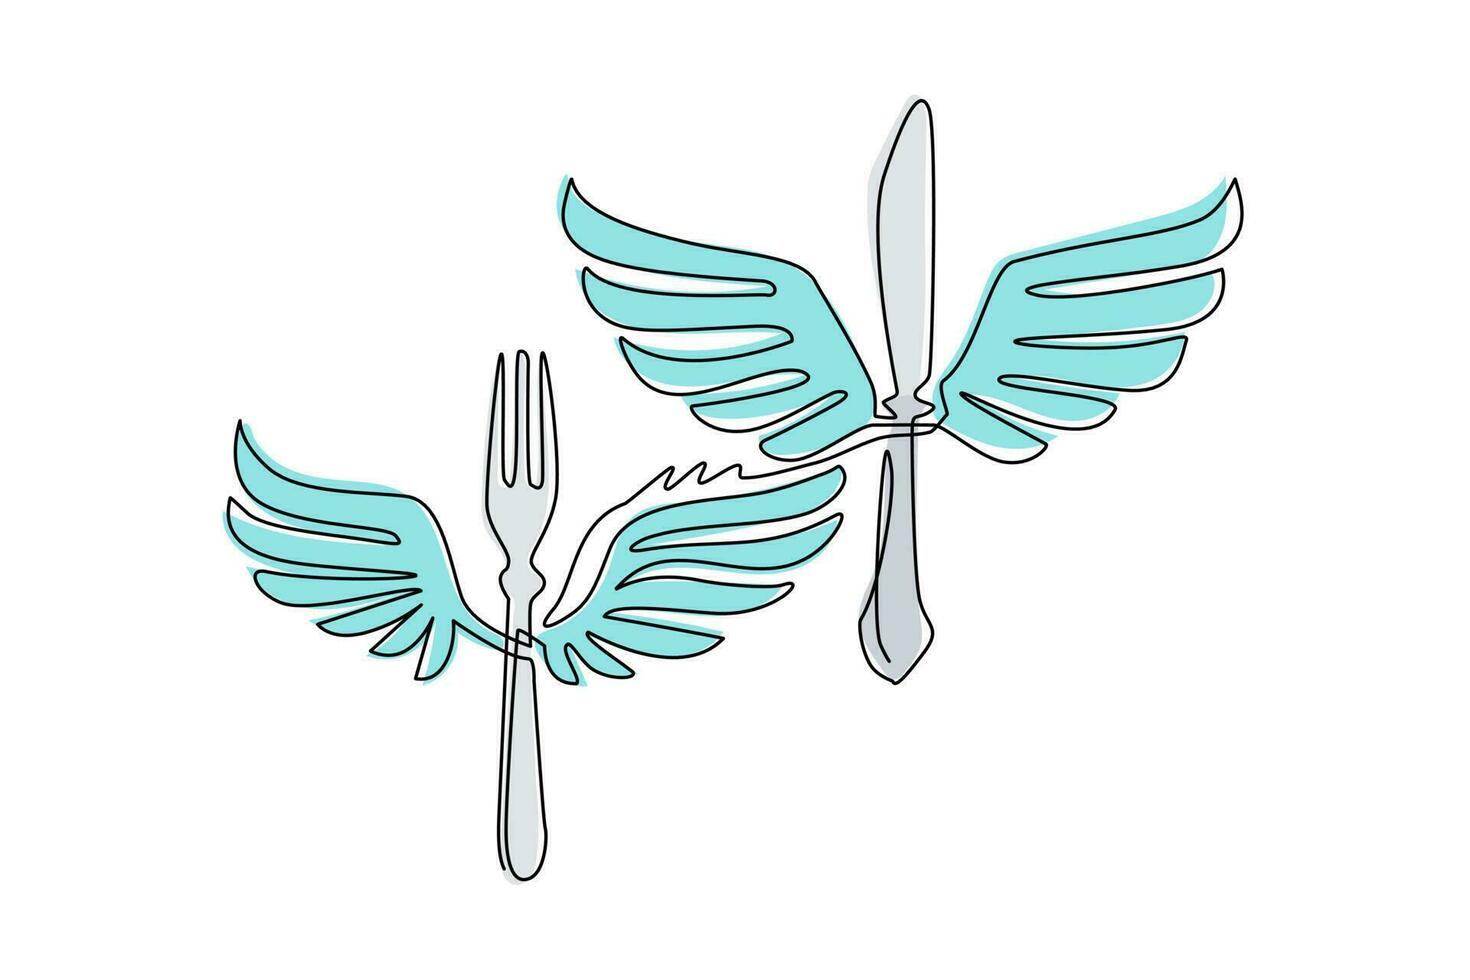 Single continuous line drawing food fork and knife with wings fly flat logo symbol icon. Winged silhouette fork and knife. Food business theme. Dynamic one line draw graphic design vector illustration